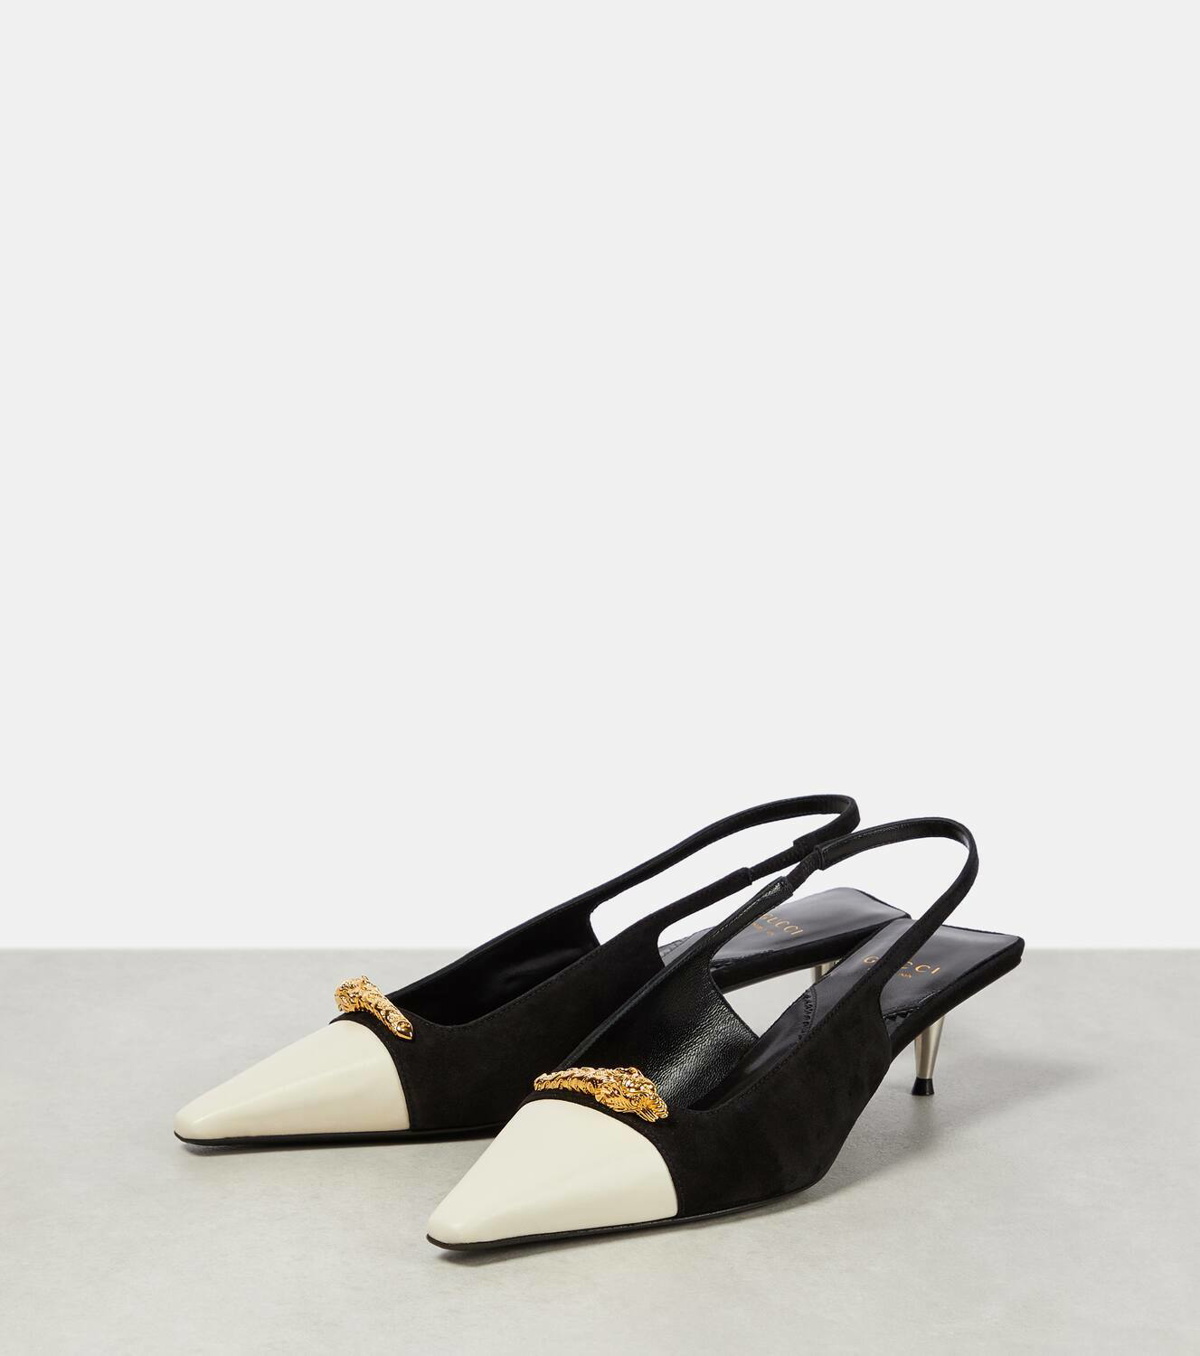 Gucci Embellished leather and suede slingback pumps